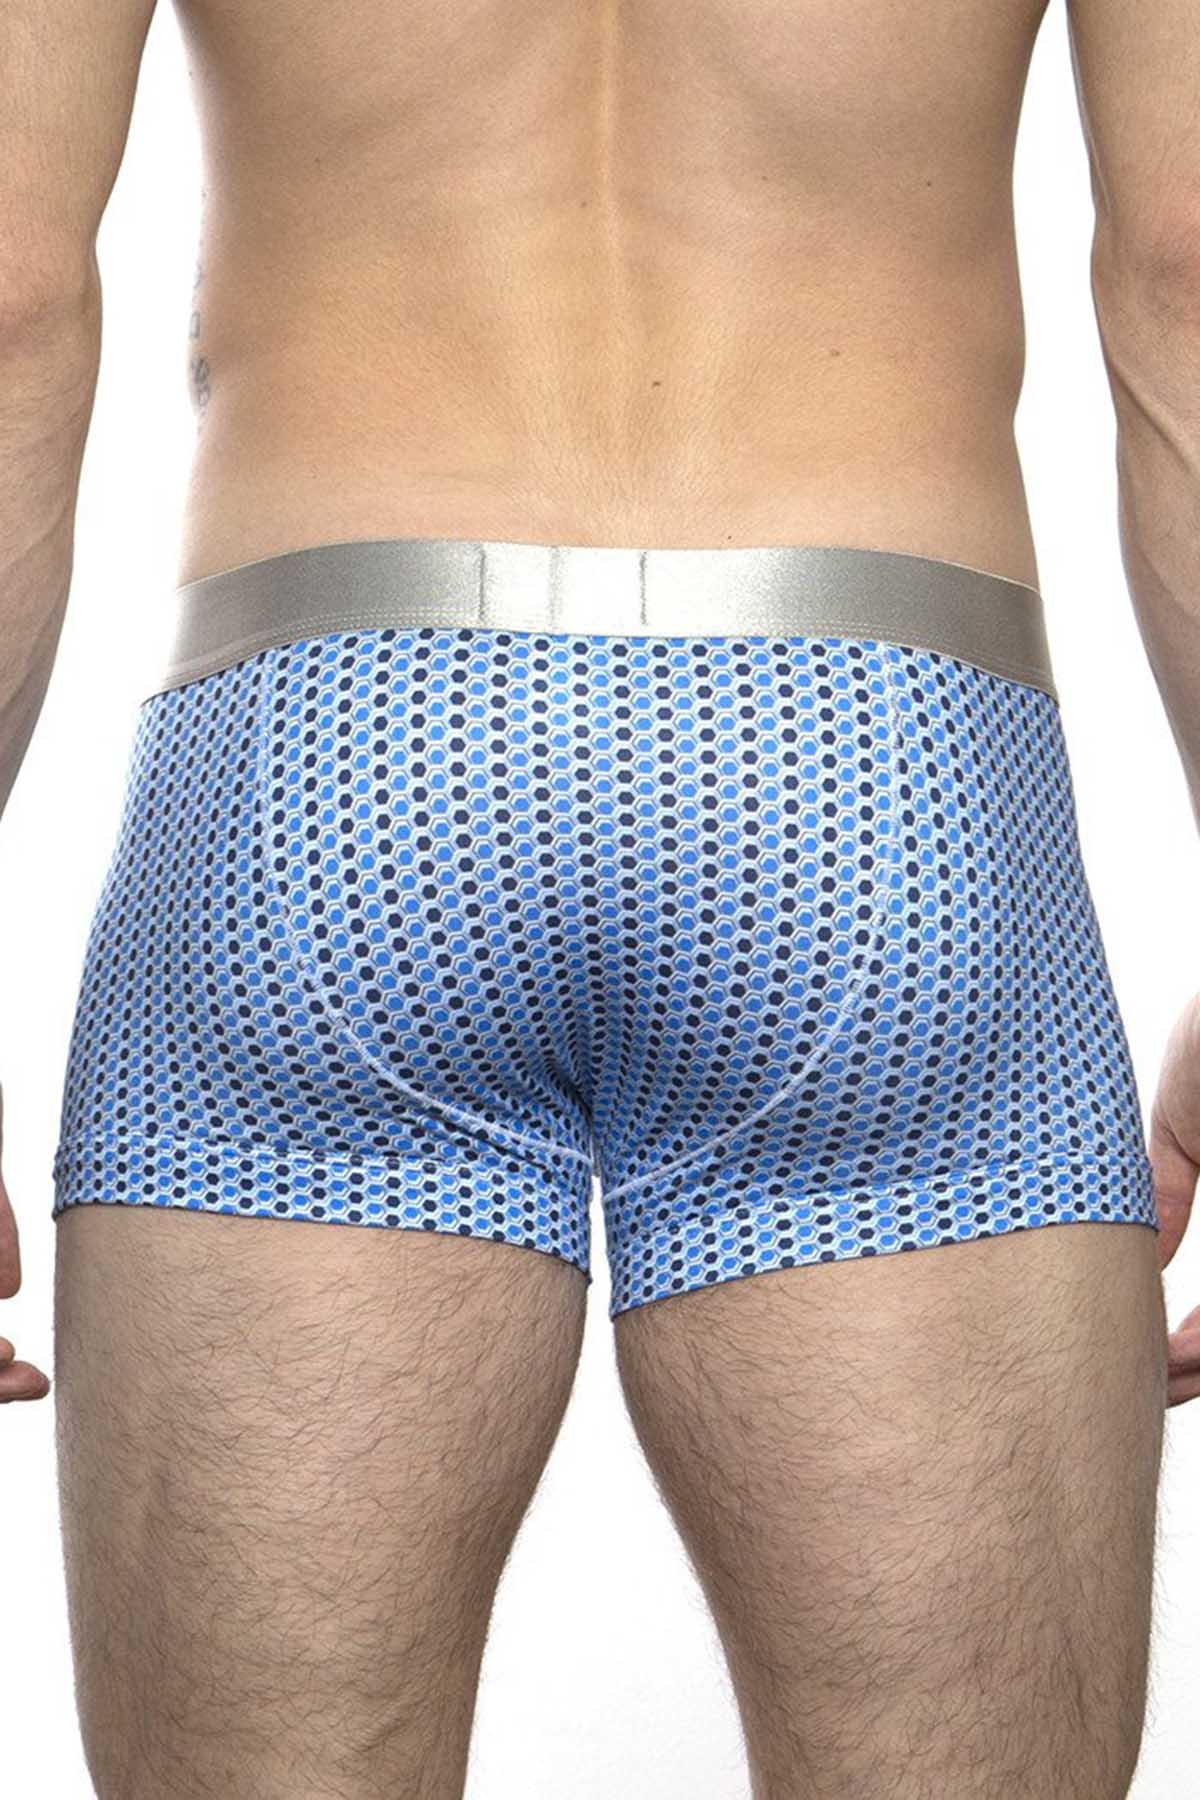 Parke & Ronen Navy/White Printed Clipper Low-Rise Trunk